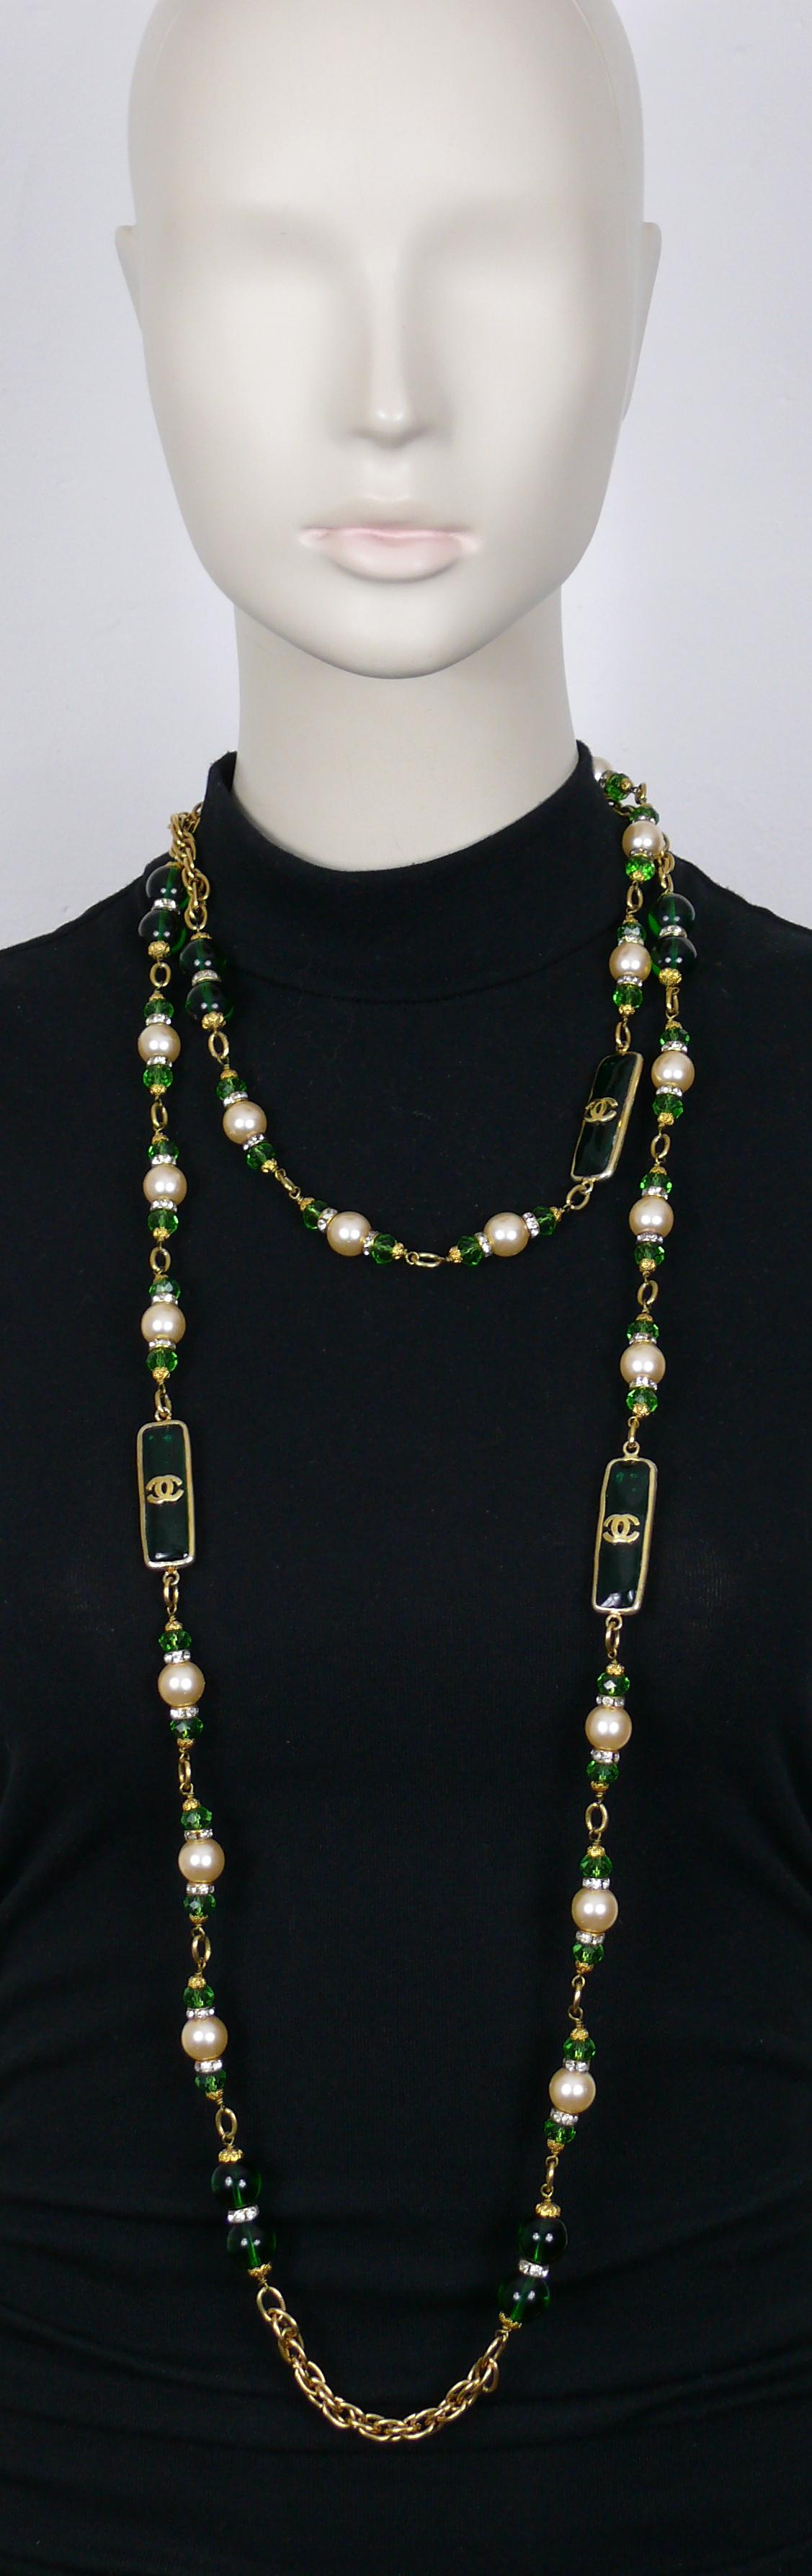 CHANEL by KARL LAGERFELD gorgeous vintage gold toned chain necklace featuring MAISON GRIPOIX green glass beads and rectangular links with CC logos, glass faux pearls, green facetted beads and clear crystal rondelles.

From the Fall 1993